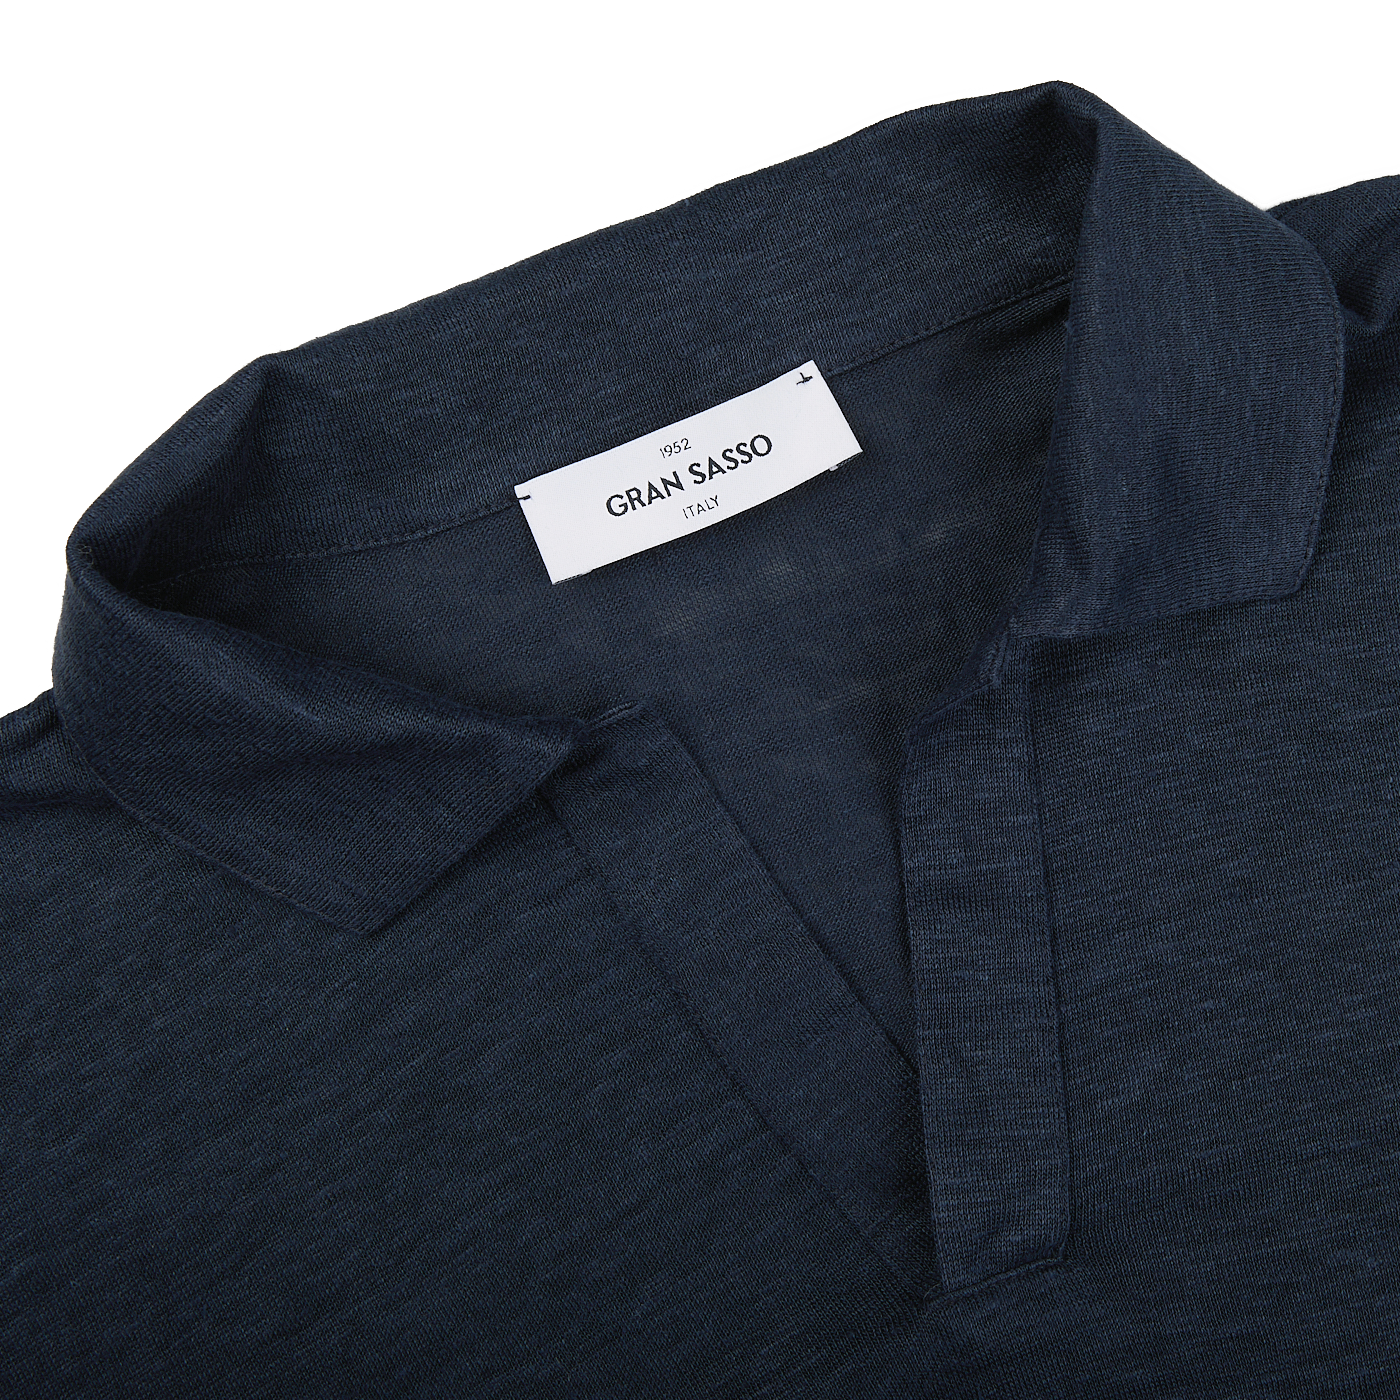 The Gran Sasso Navy Blue Knitted Linen LS Polo Shirt with a label on it.